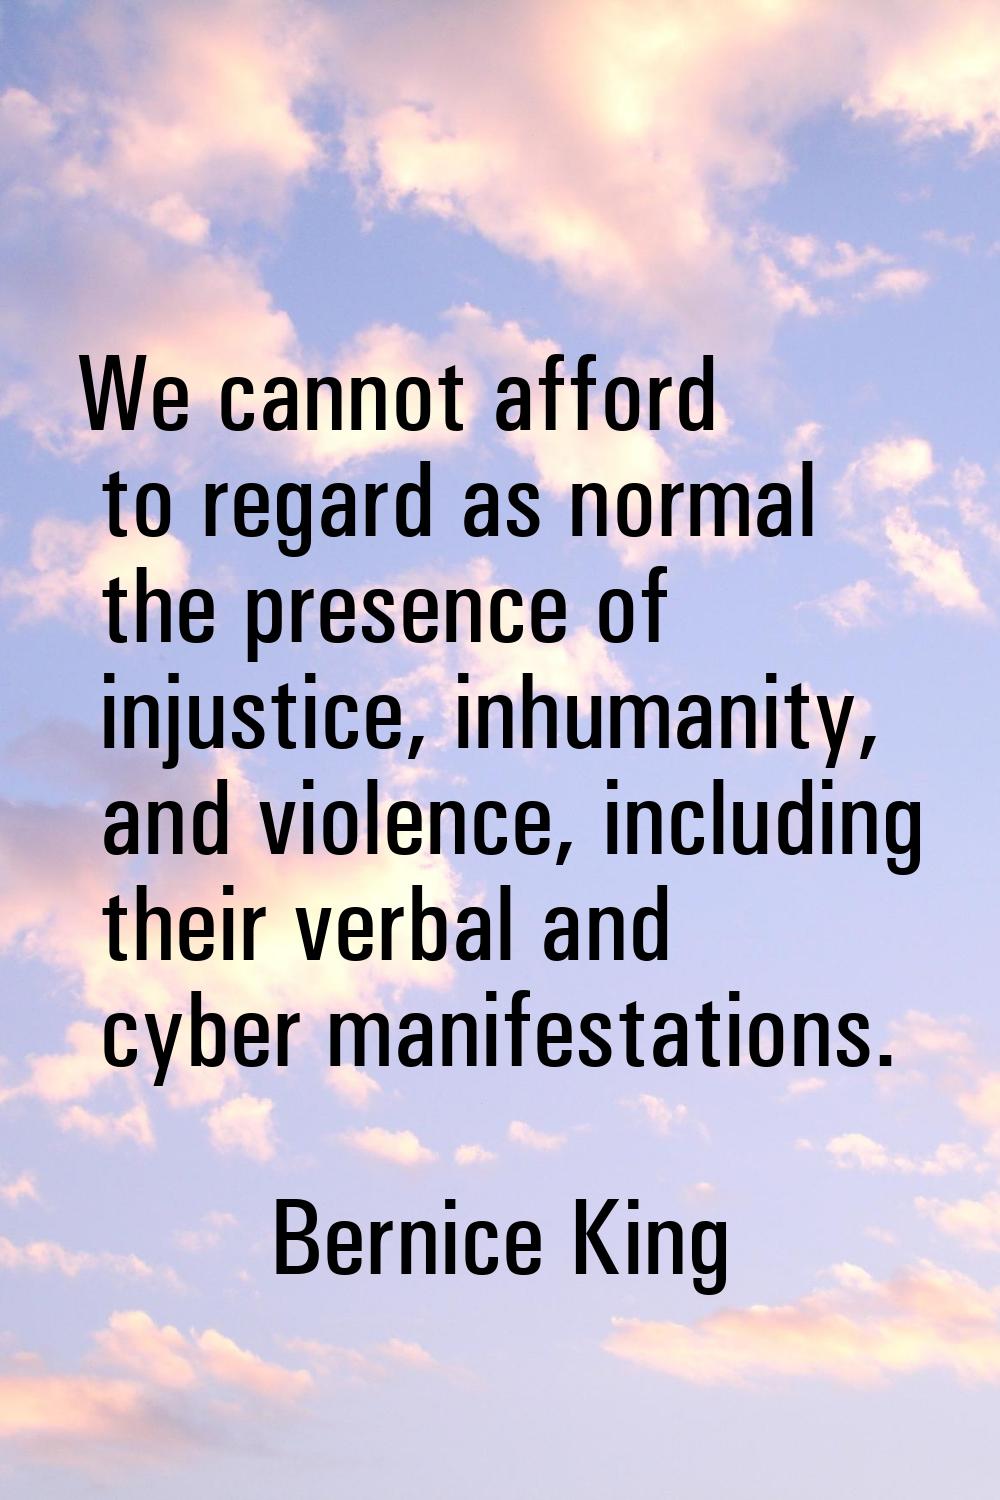 We cannot afford to regard as normal the presence of injustice, inhumanity, and violence, including